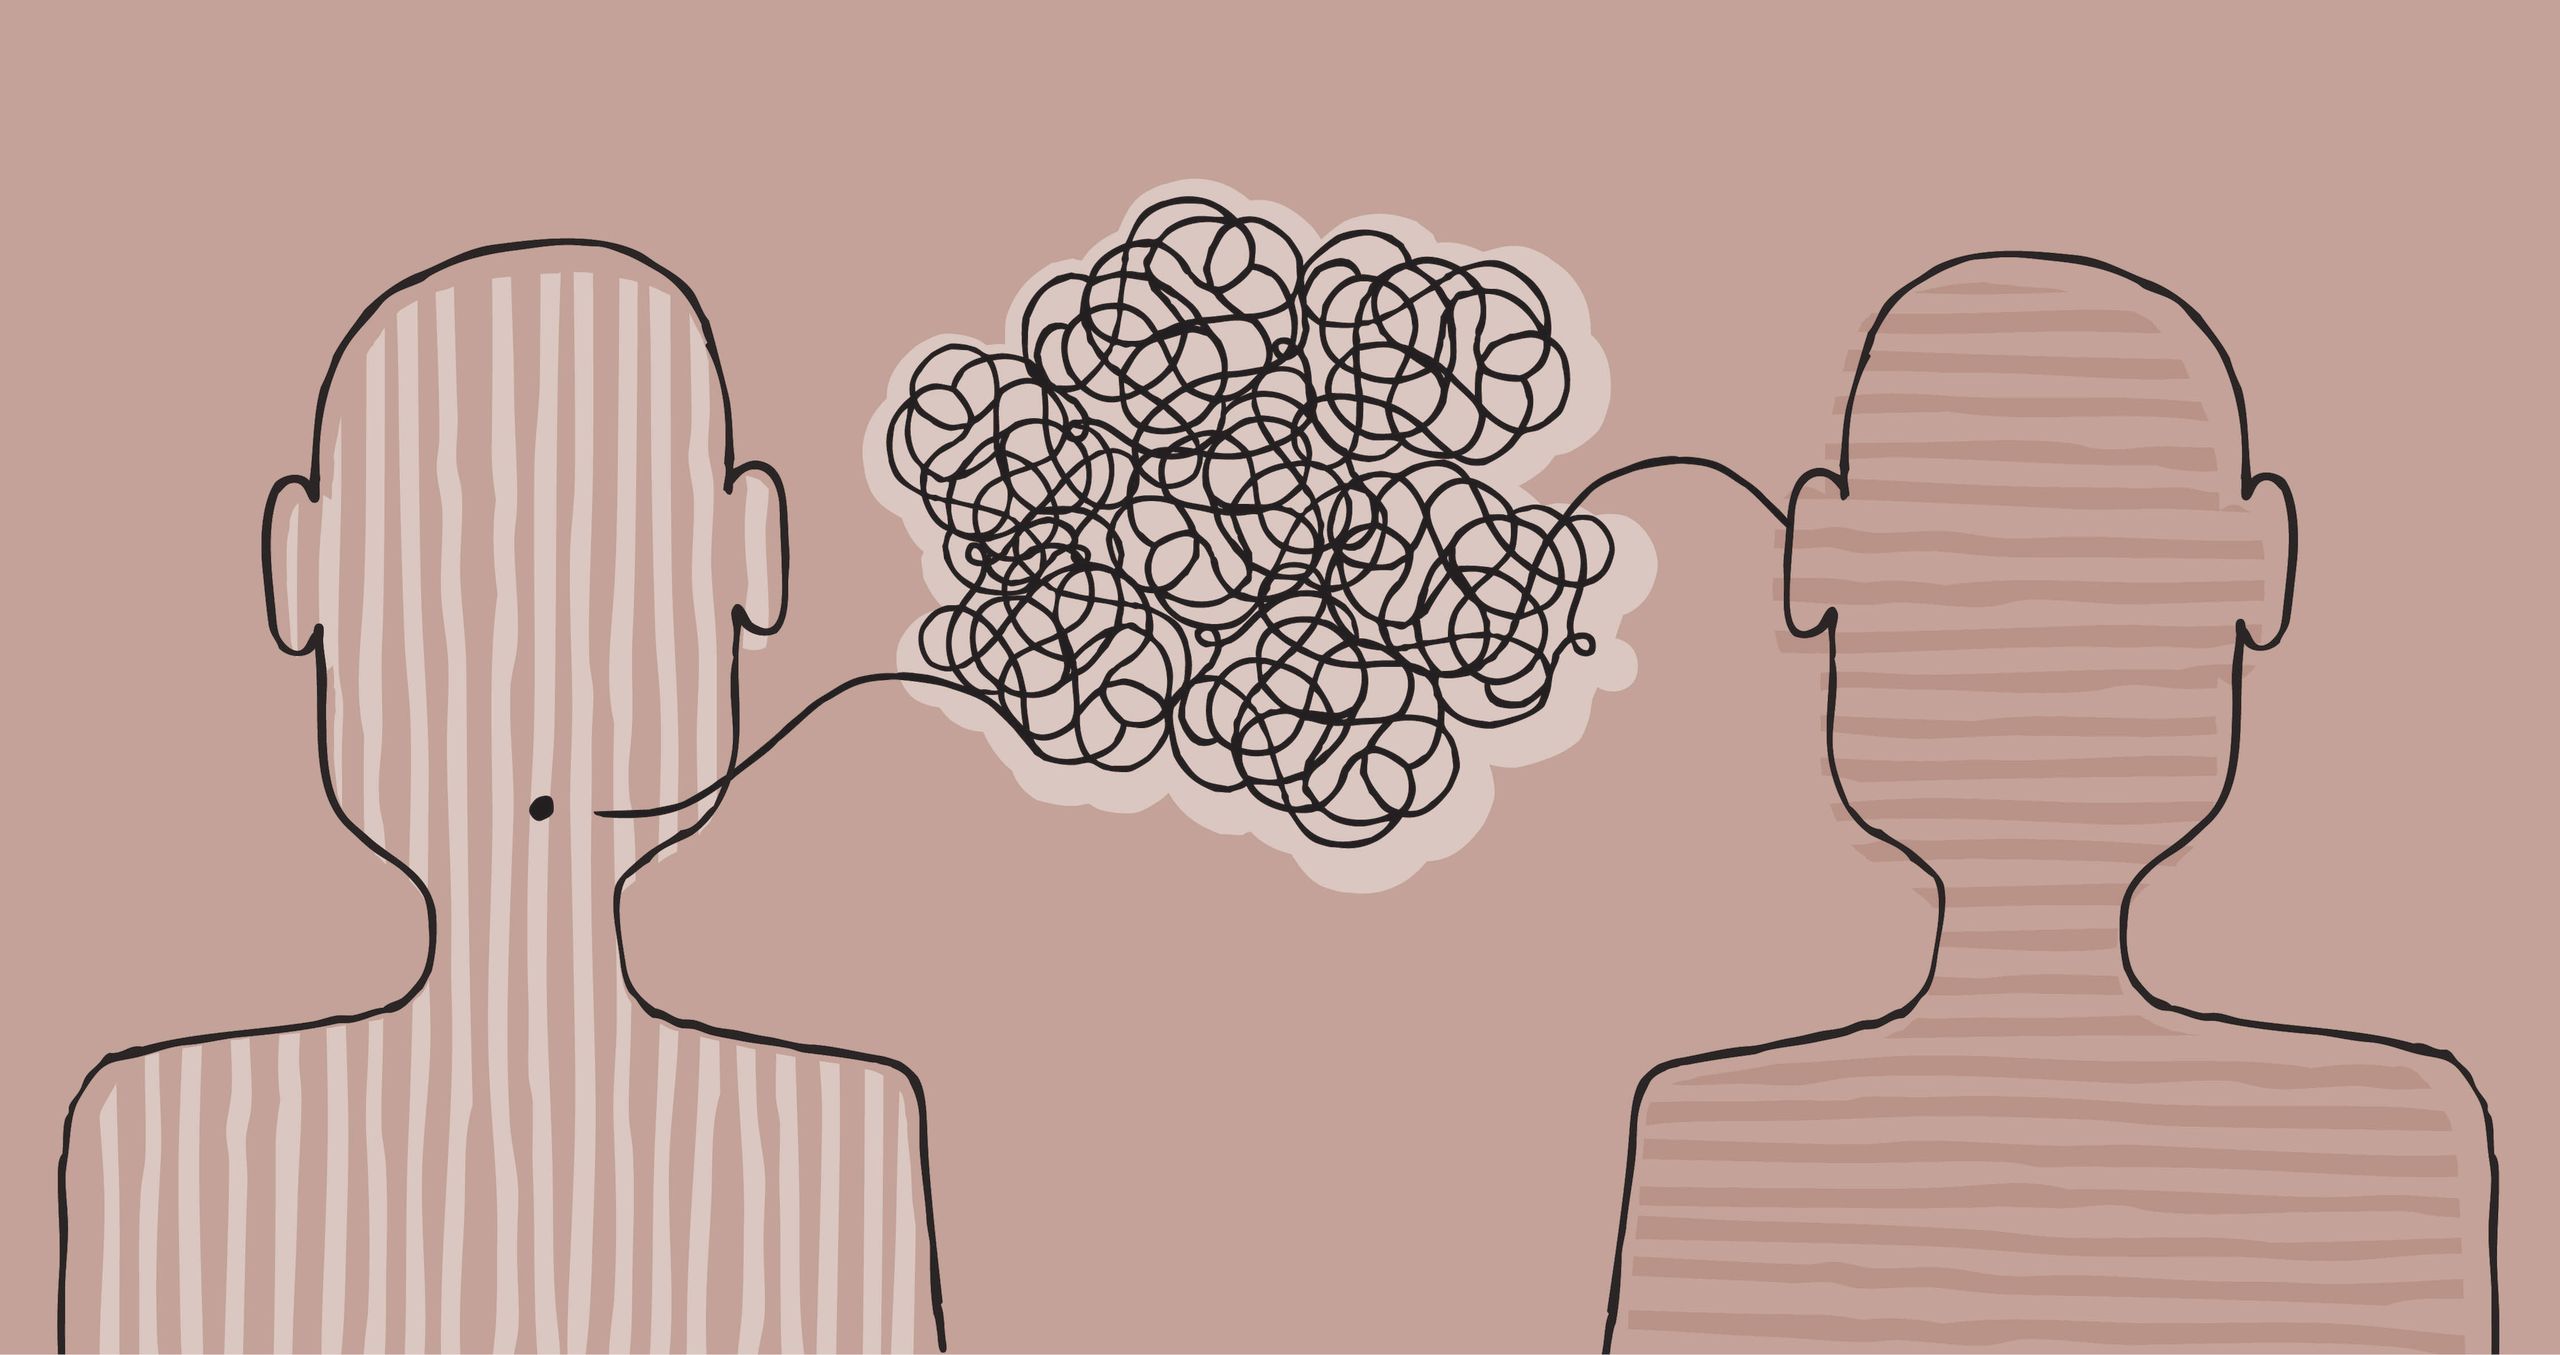 An illustration of two people talking